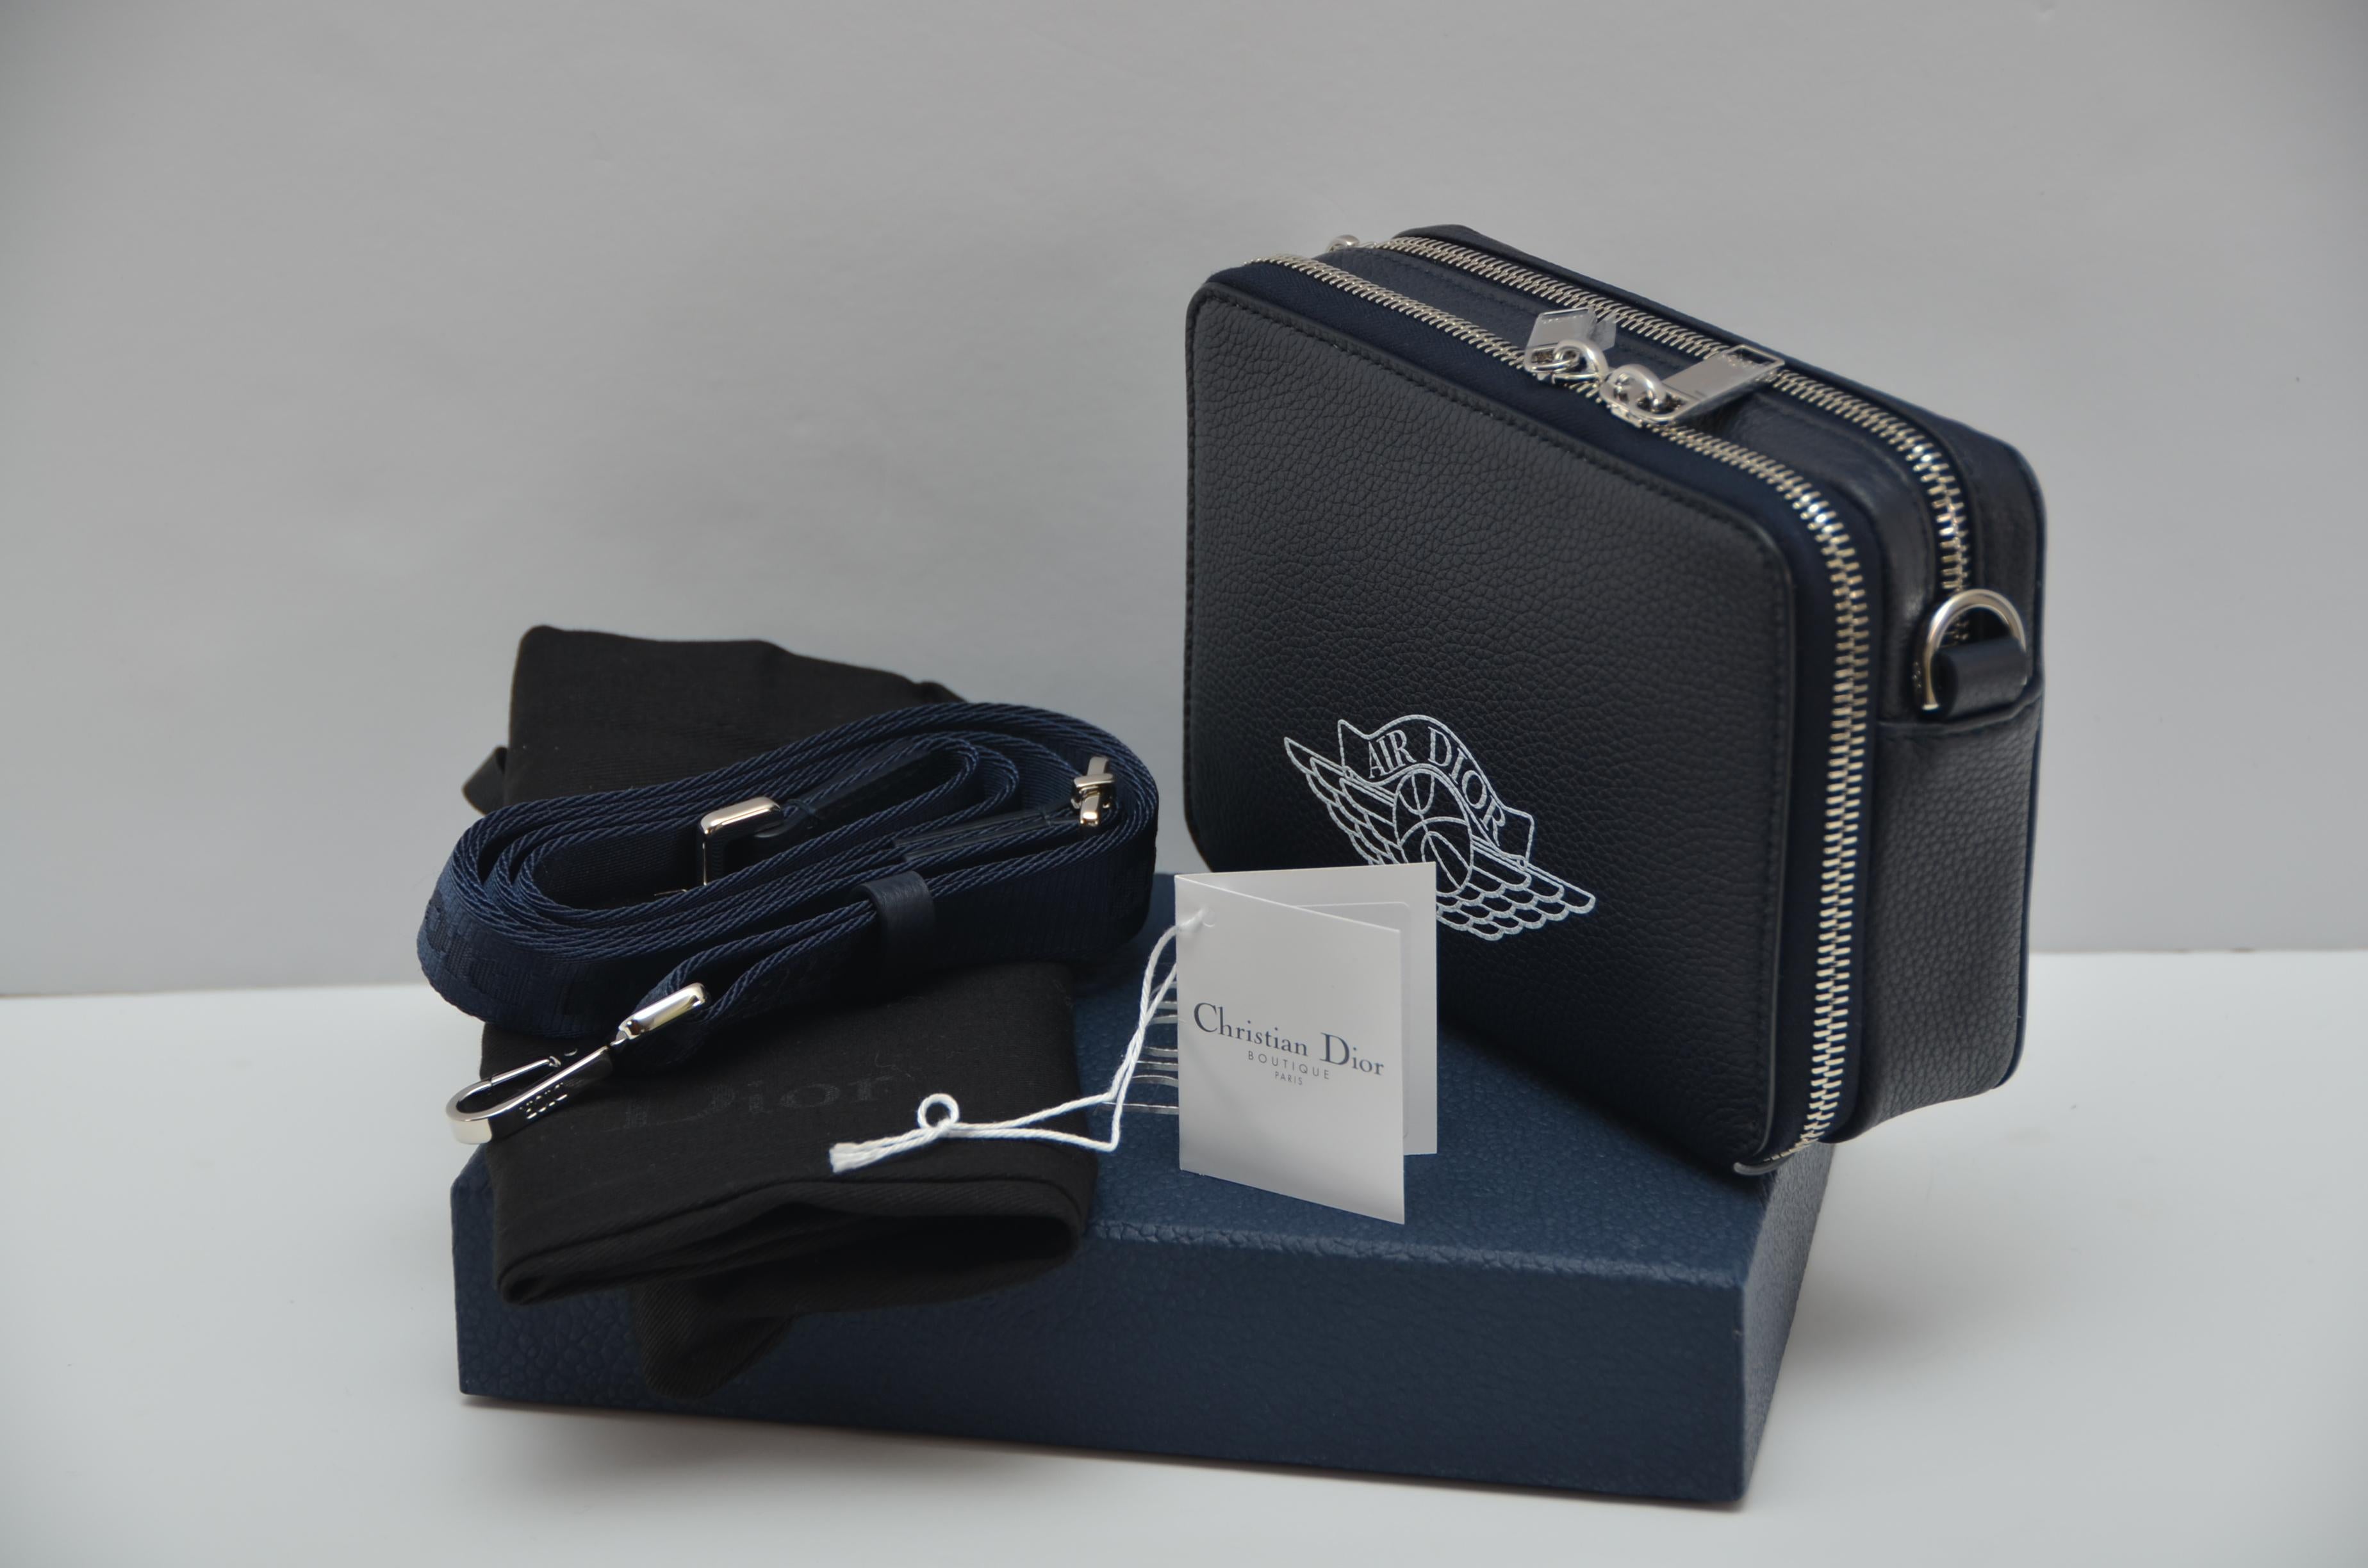 
100% guaranteed authentic 
Dior X Jordan AirDior Navy Crossbody Messenger Bag
For the Men’s Fall 2020 Runway show in Miami, Dior and Kim Jones partnered with Jordan Brand to unveil the limited-edition Air Jordan collaboration  

COLOUR: